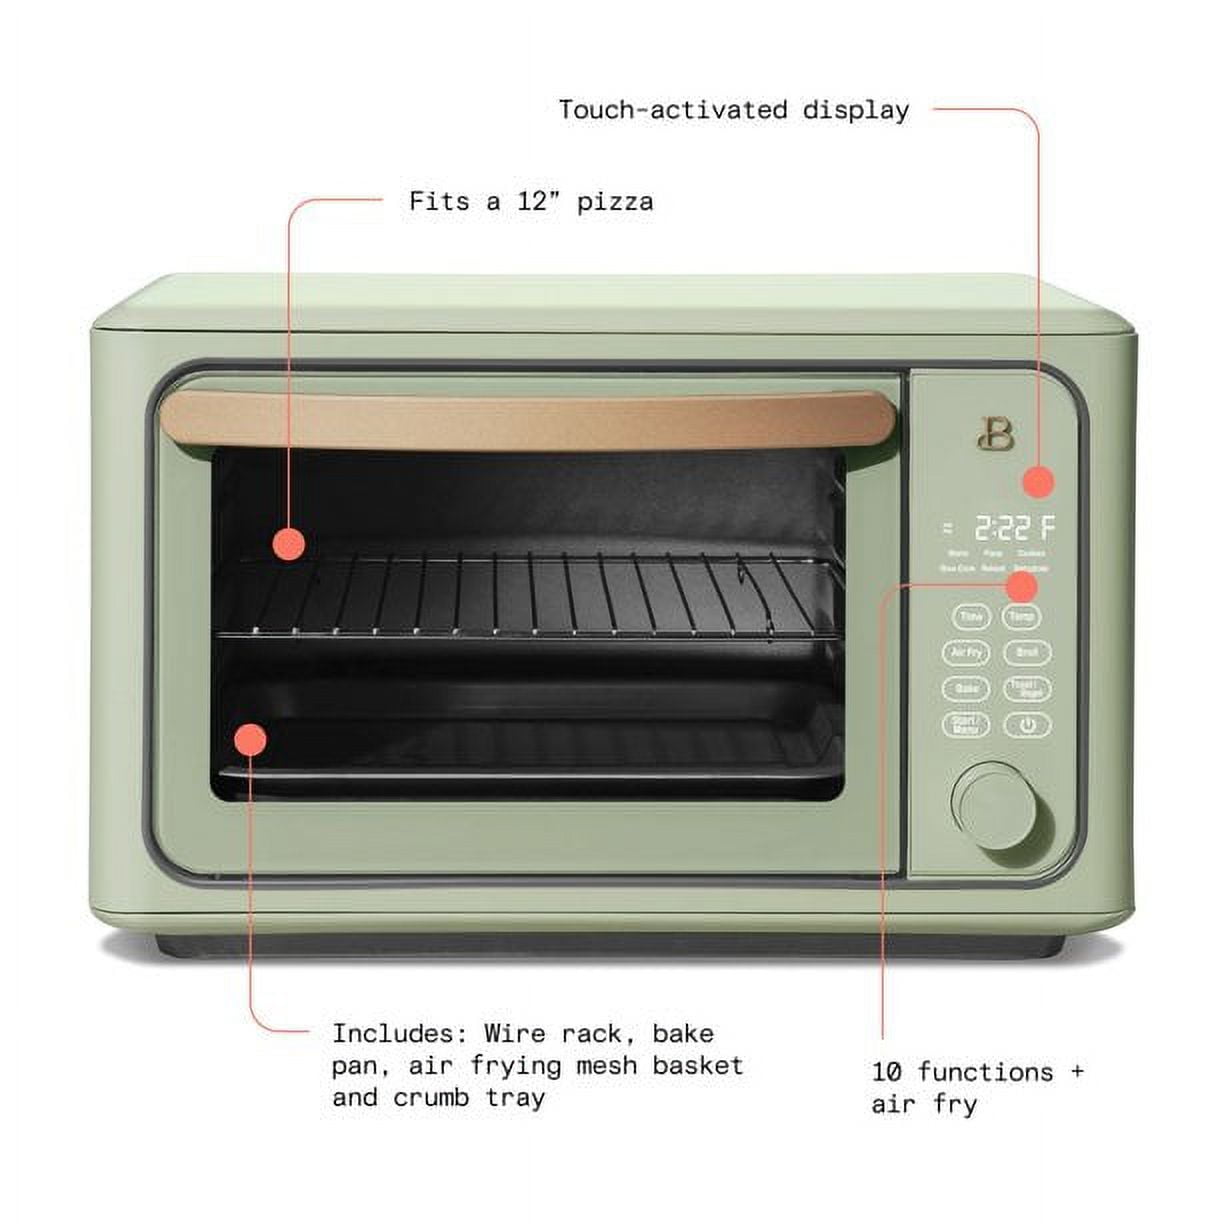 𝓞𝓘𝓜𝓘𝓢 Air Fryer Toaster Ovens, 17QT Small Toaster Ovens Countertop 16L  4 Slice Toaster Convection Oven Air with Rotisserie